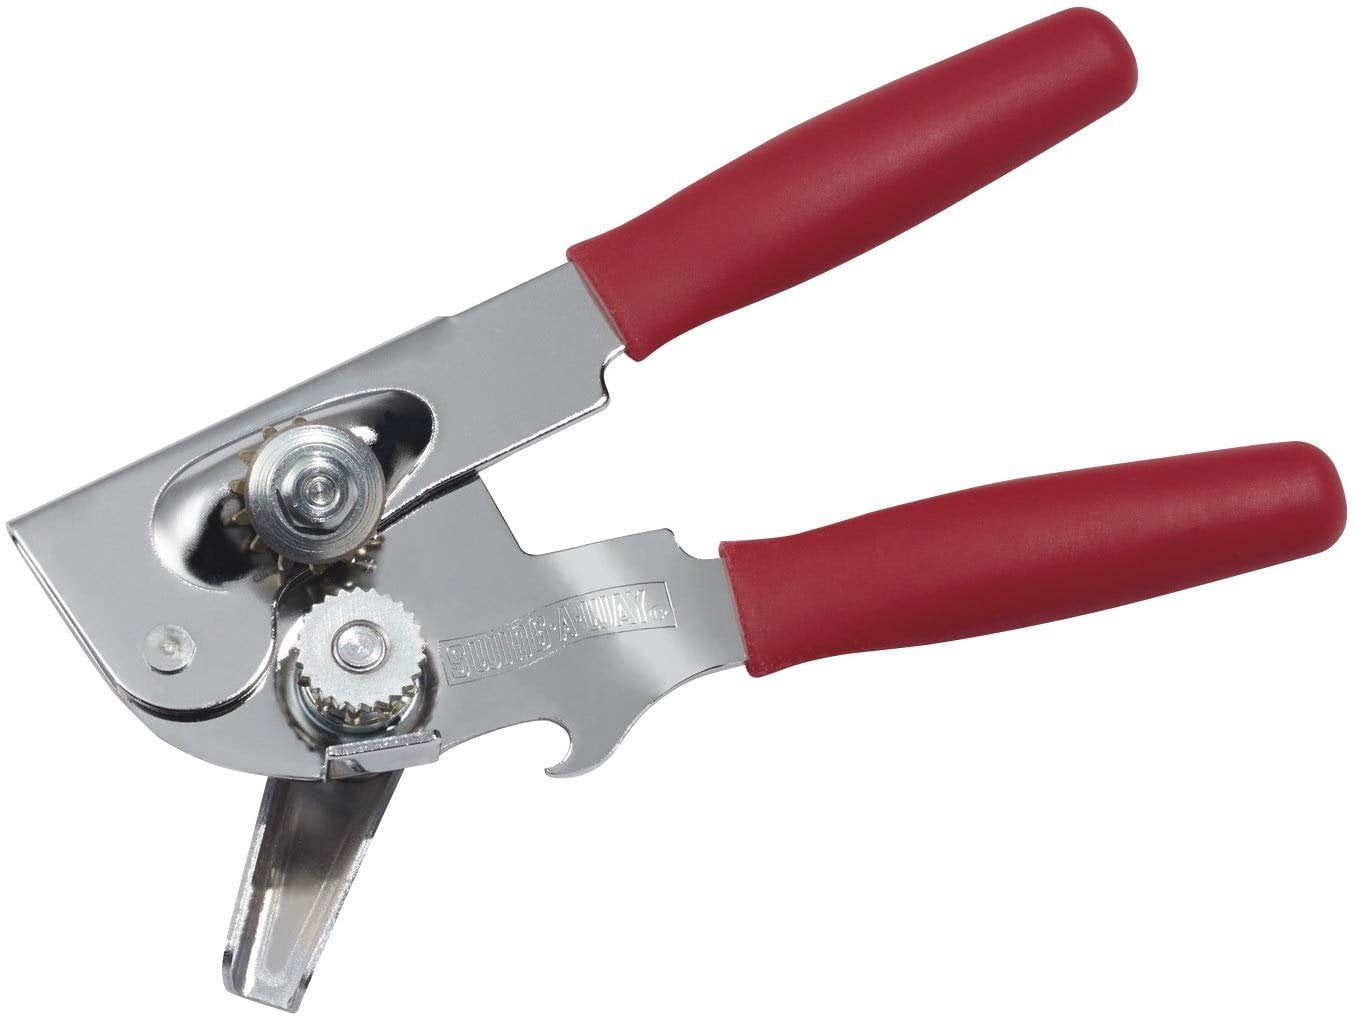 Comfy Grip Red Stainless Steel Can Opener - 7 3/4 x 2 x 2 1/4 - 1 count  box